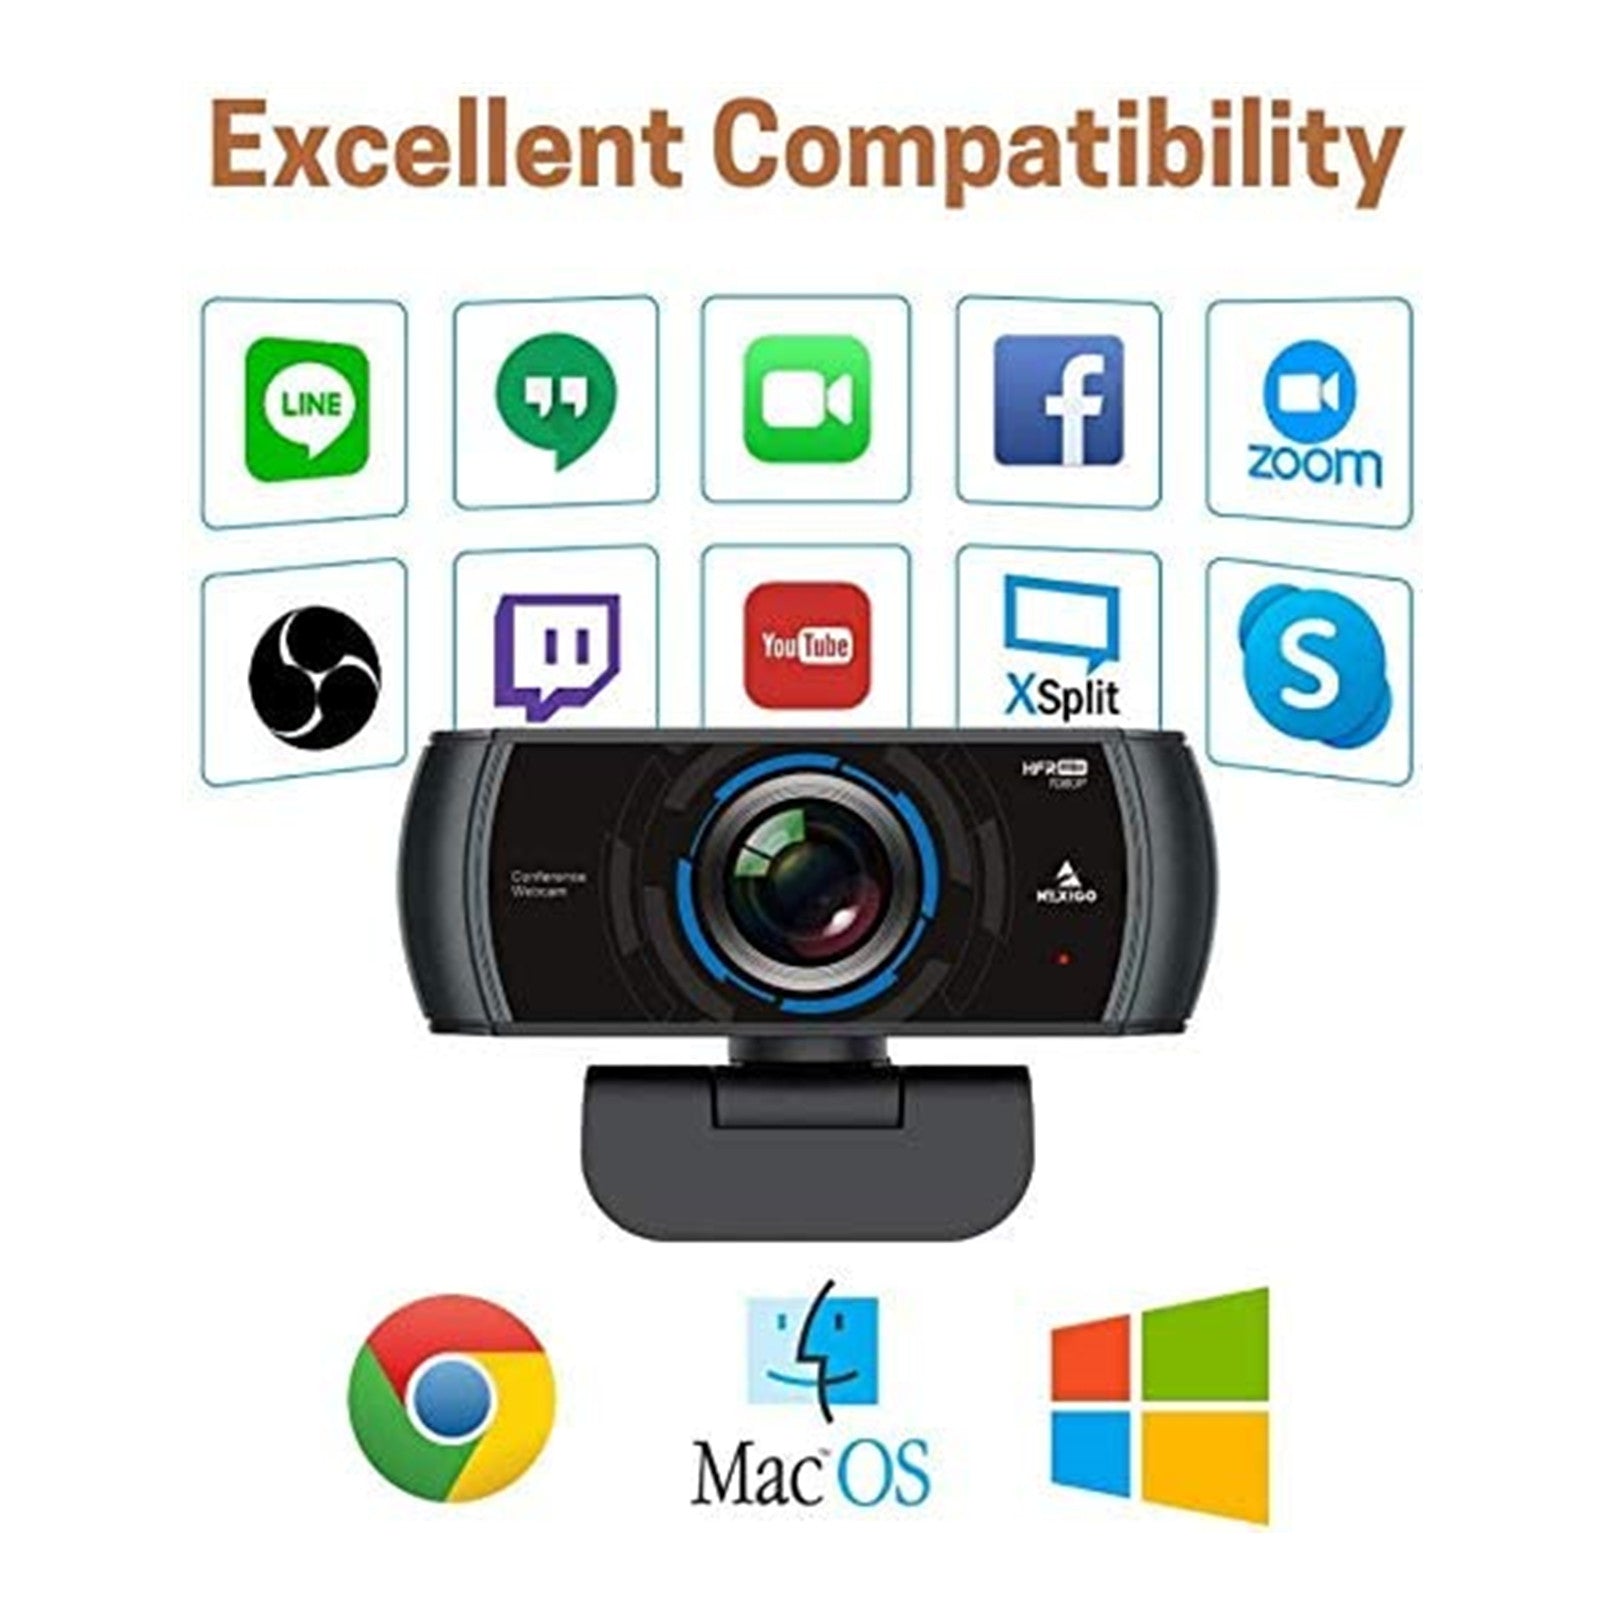 Webcam compatible with popular video software and system, like Skype, Zoom, Facetime, and more.